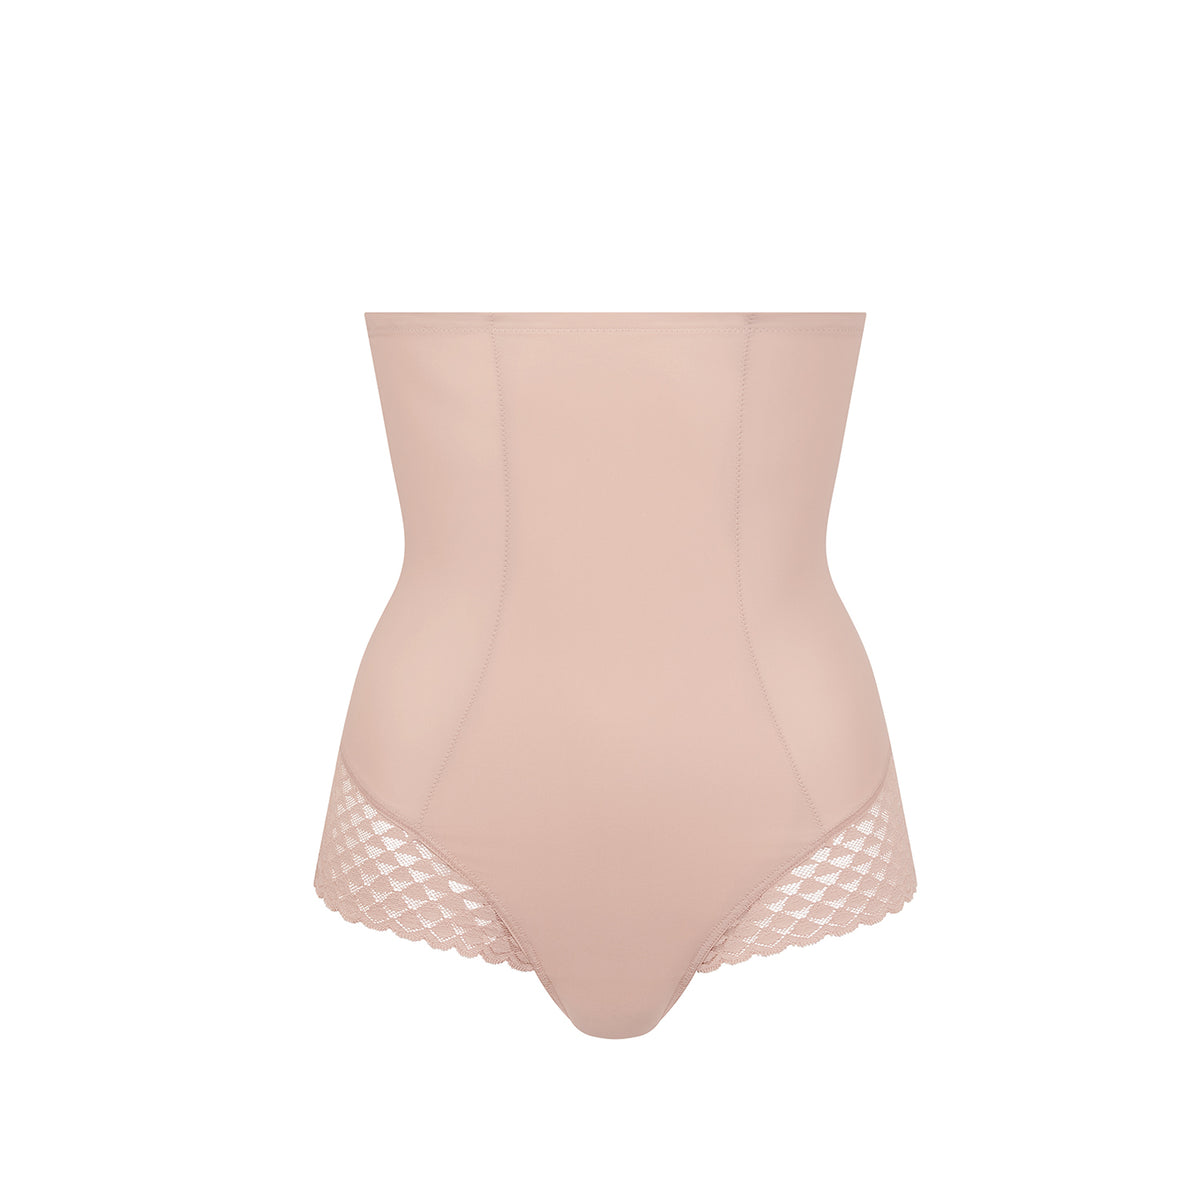 Panache Envy Full Cup Bra in Rose Pink FINAL SALE NORMALLY $67